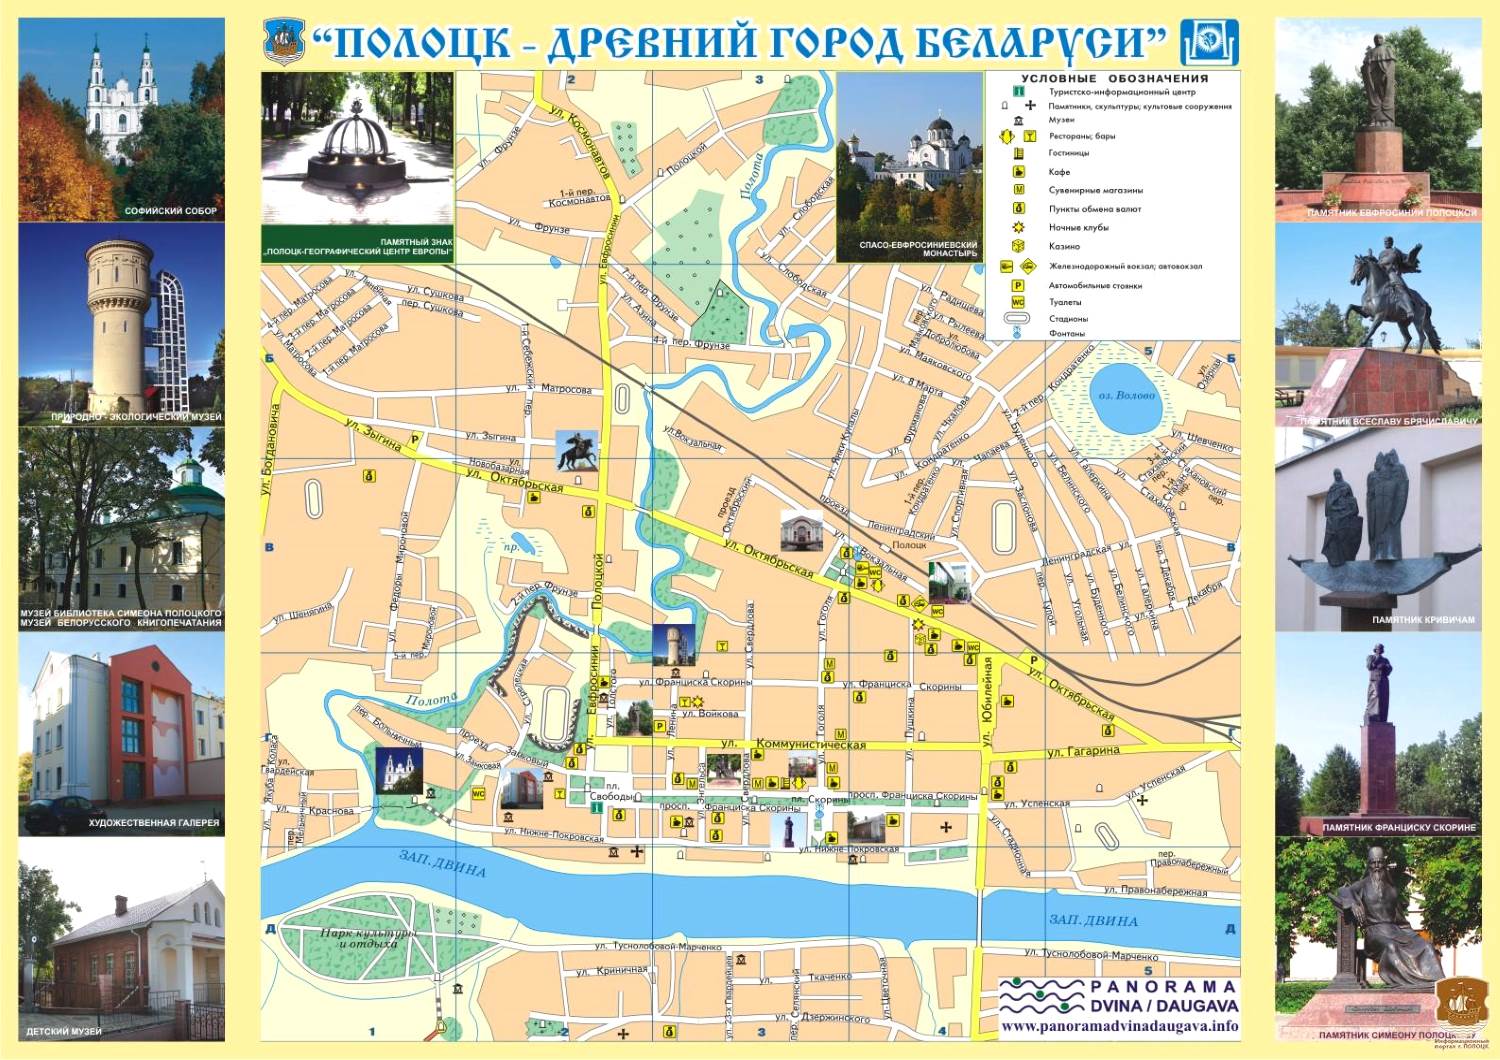 Polotsk sights on the city map